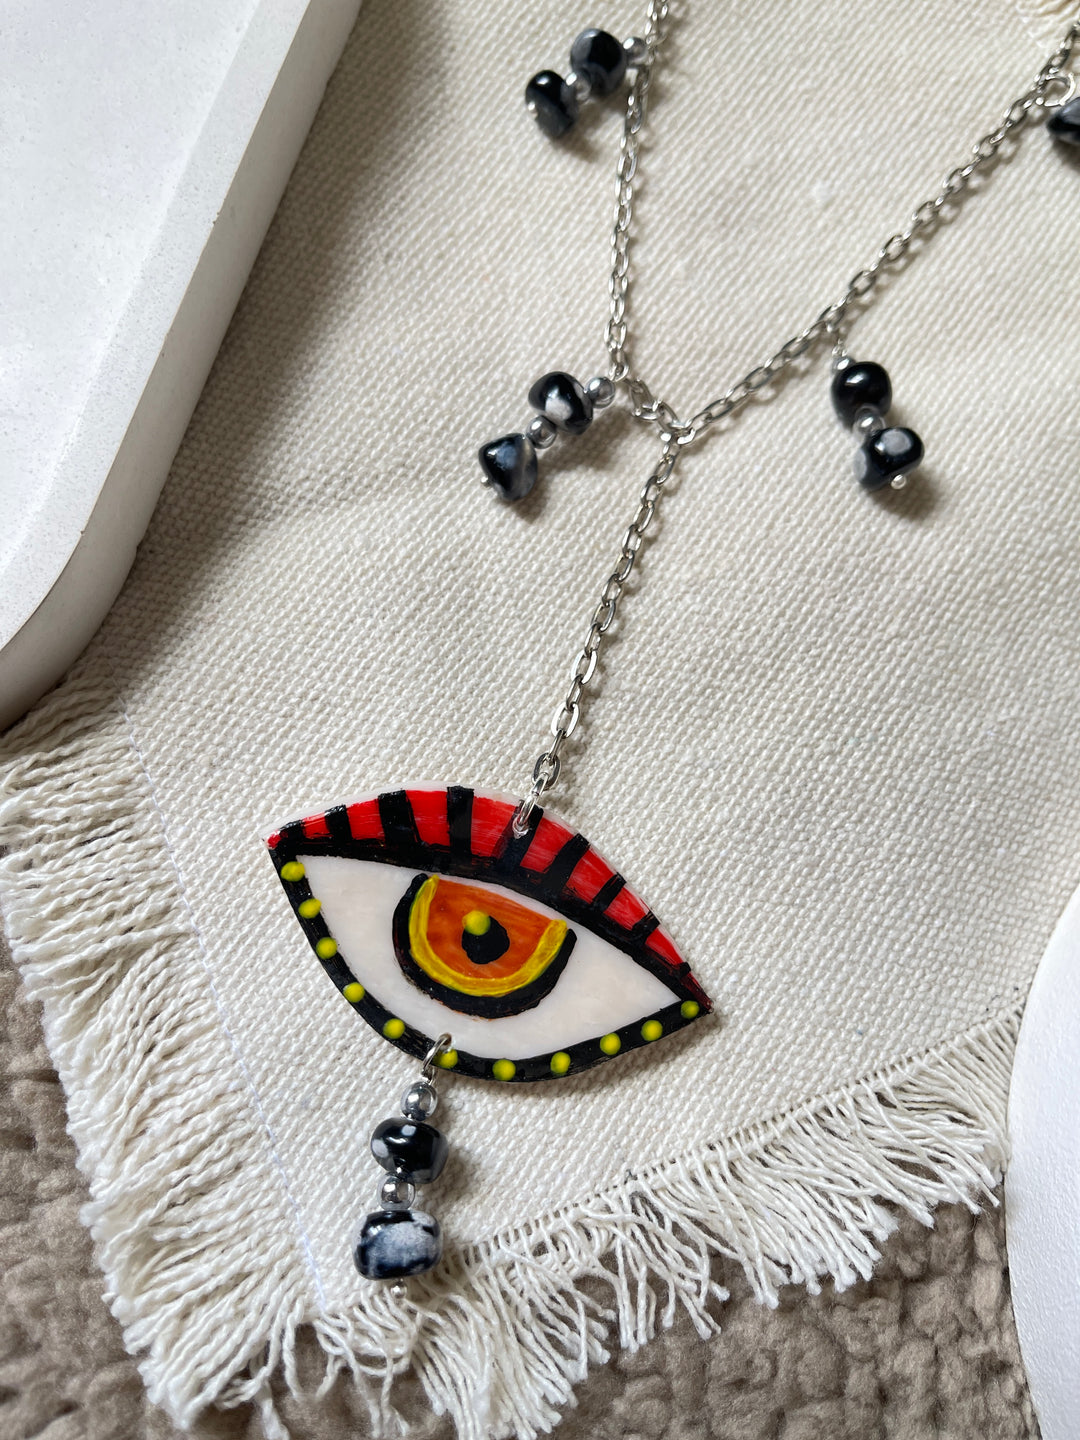 The eye in red necklace